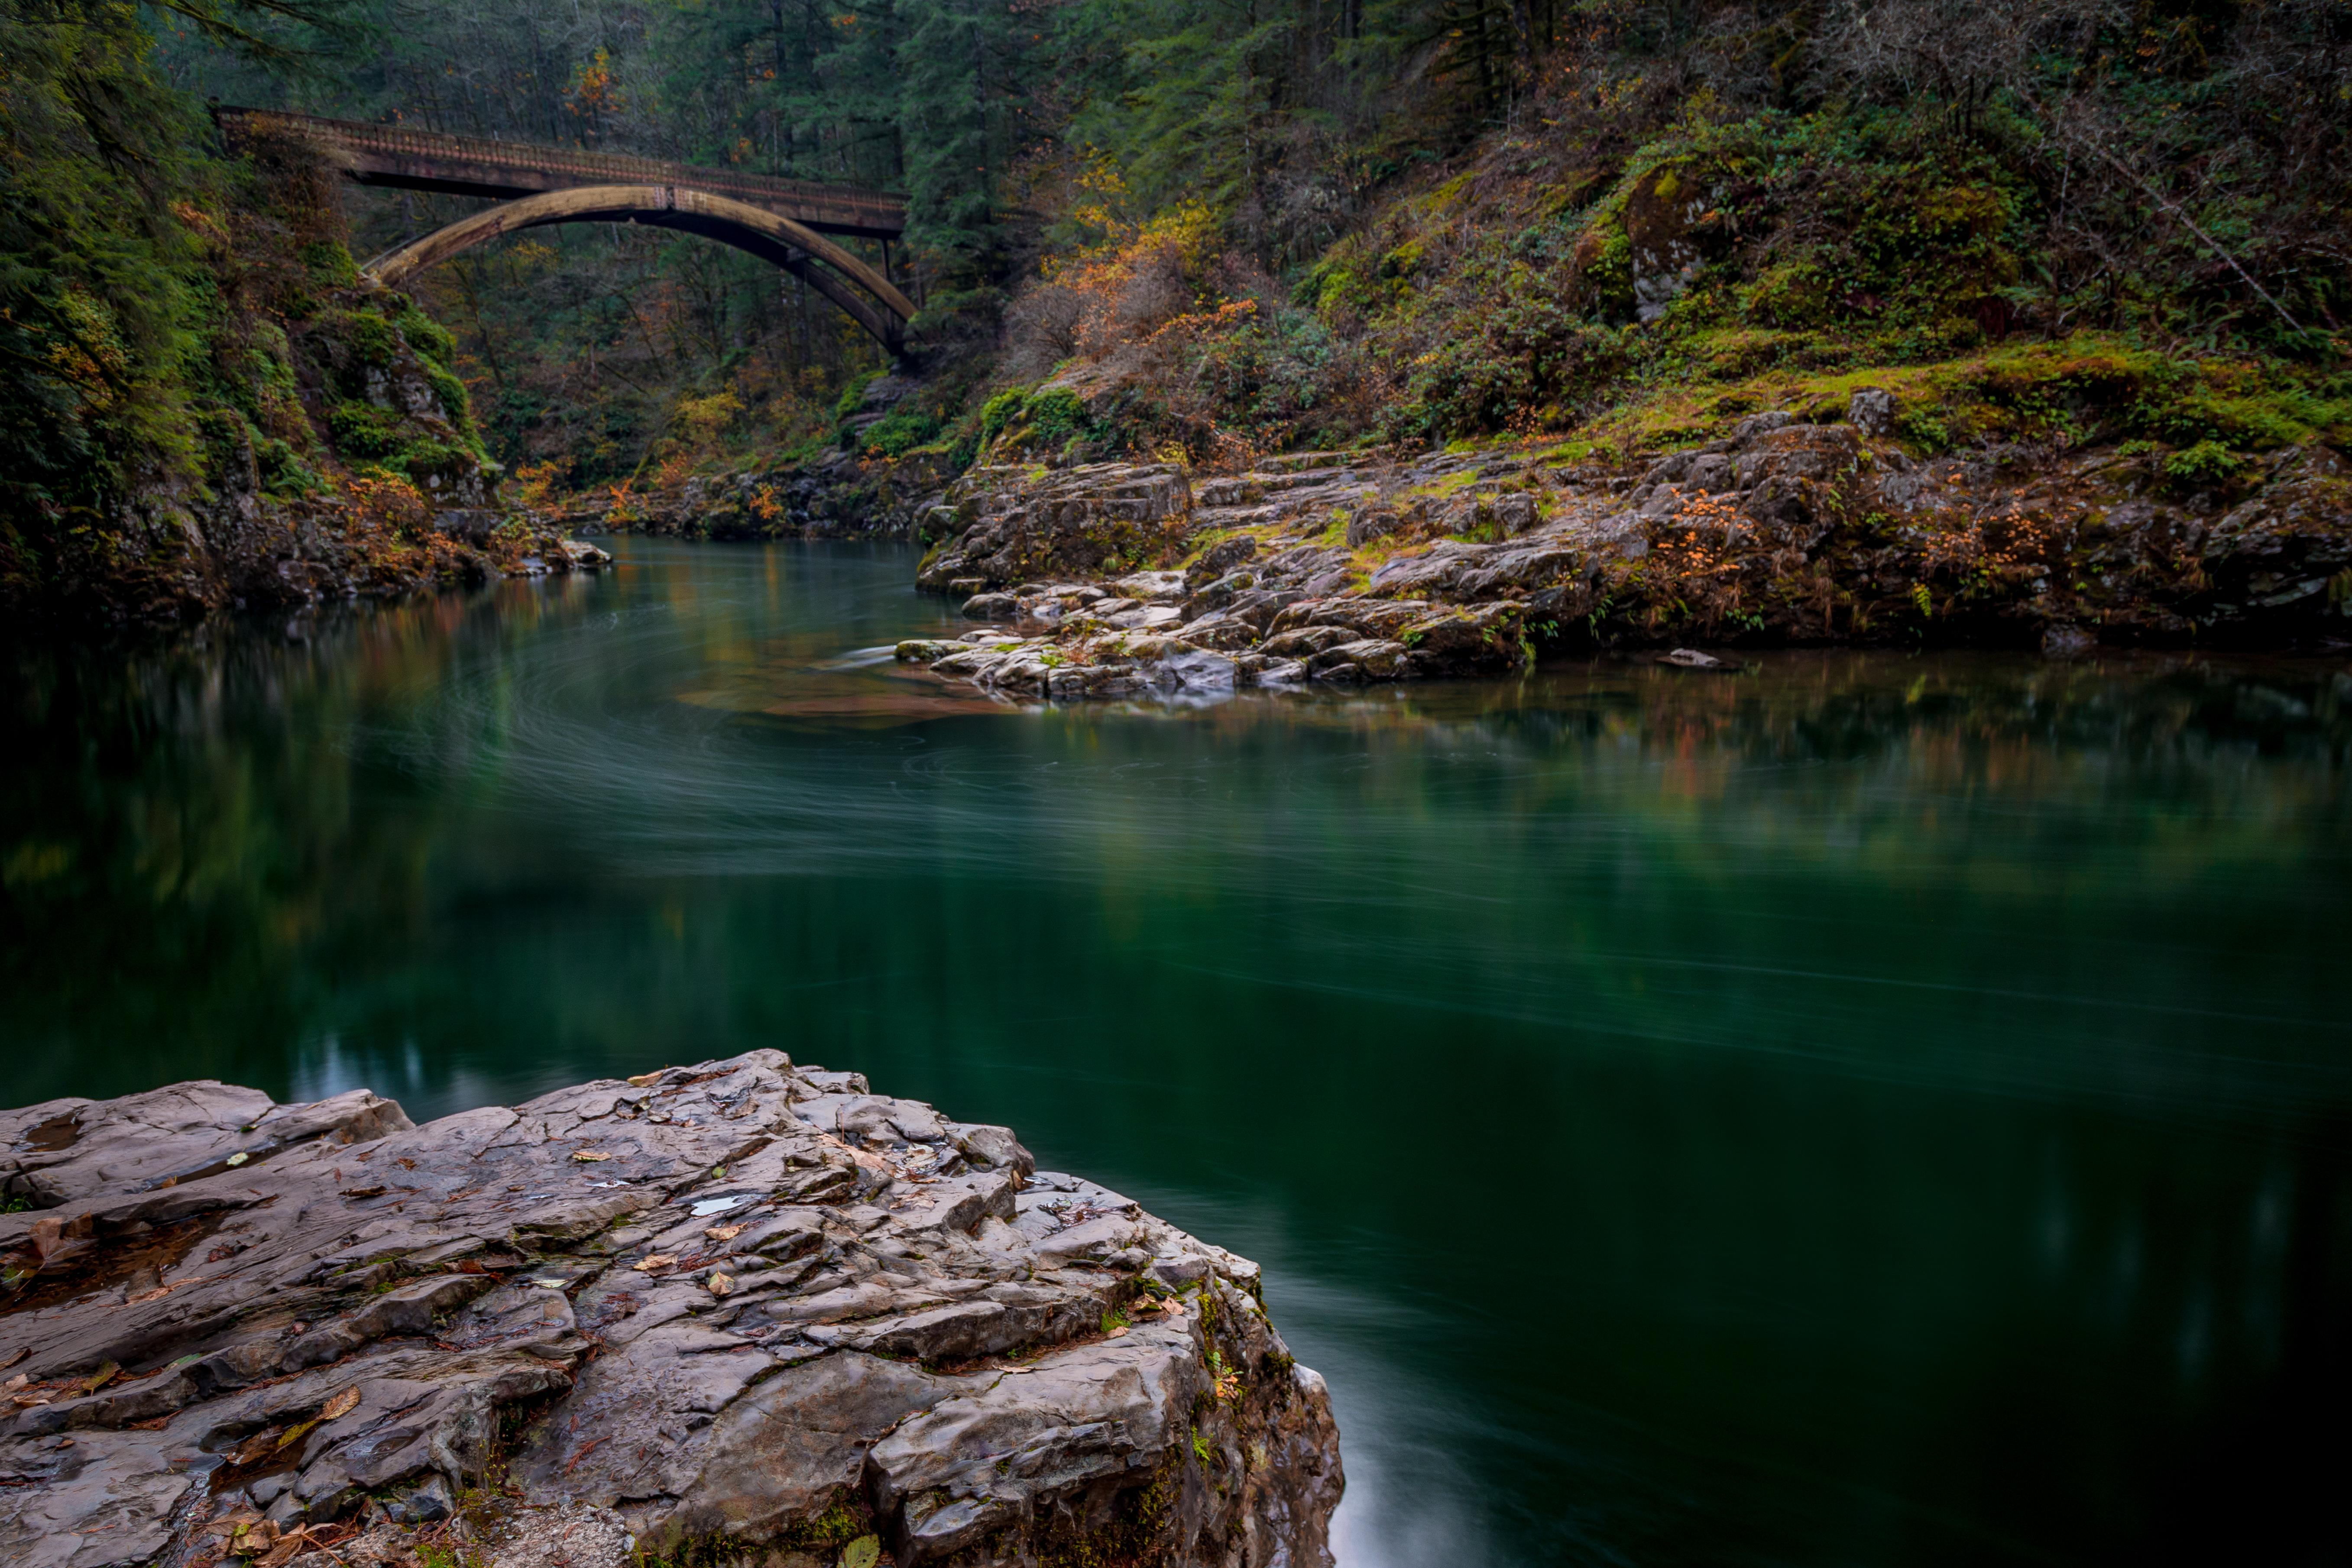 Interesting Photo of the Day: Long Exposure of an Old Bridge